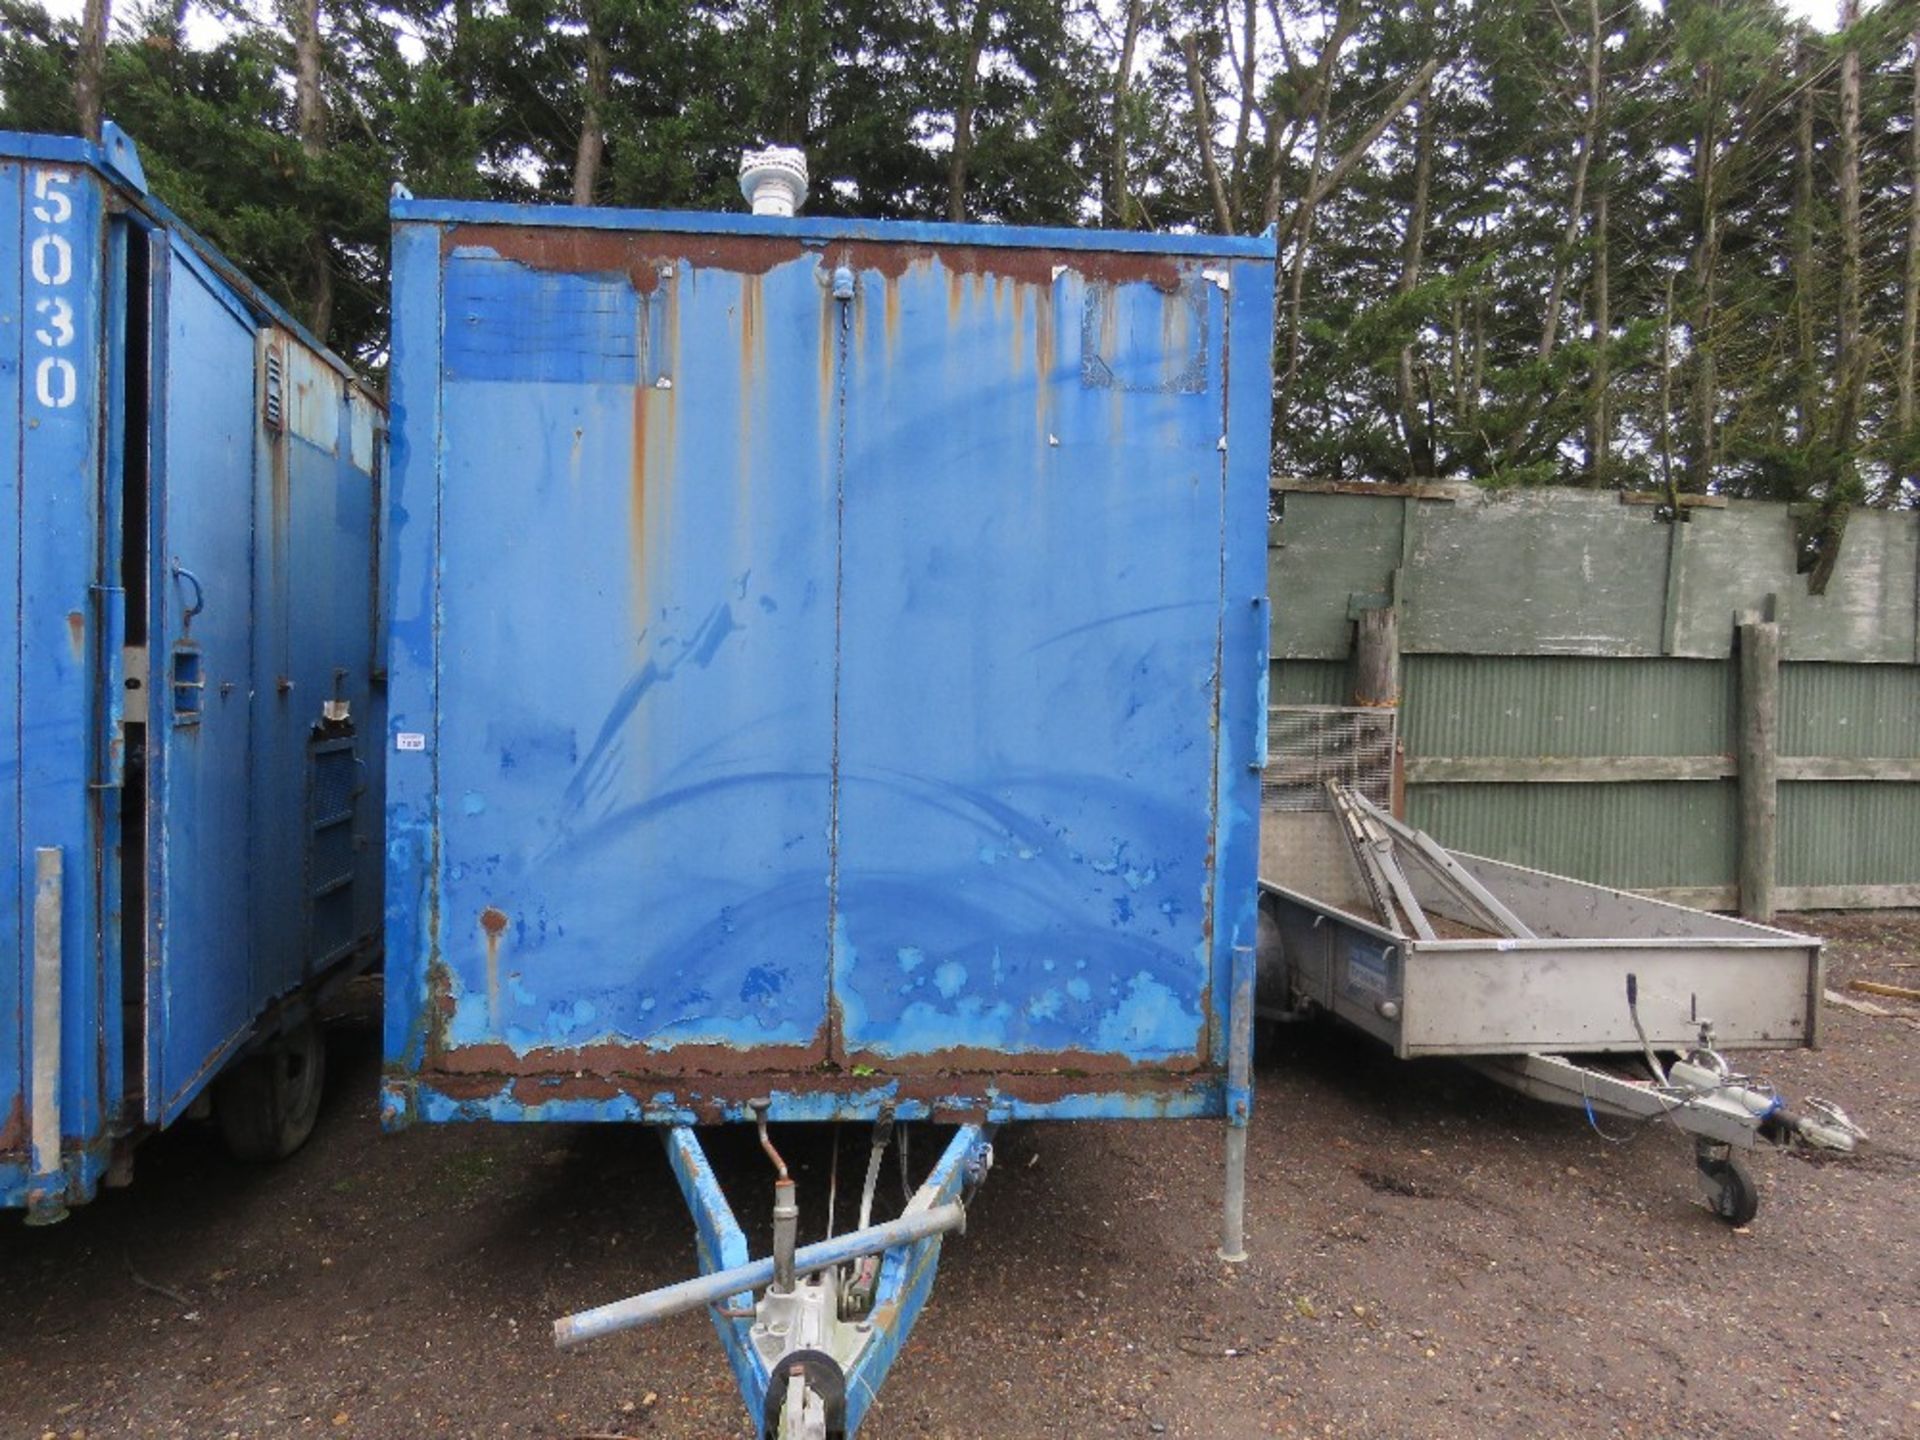 TOWED SINGLE AXLE WELFARE TRAILER WITH TOILET 12FT LENGTH APPROX.